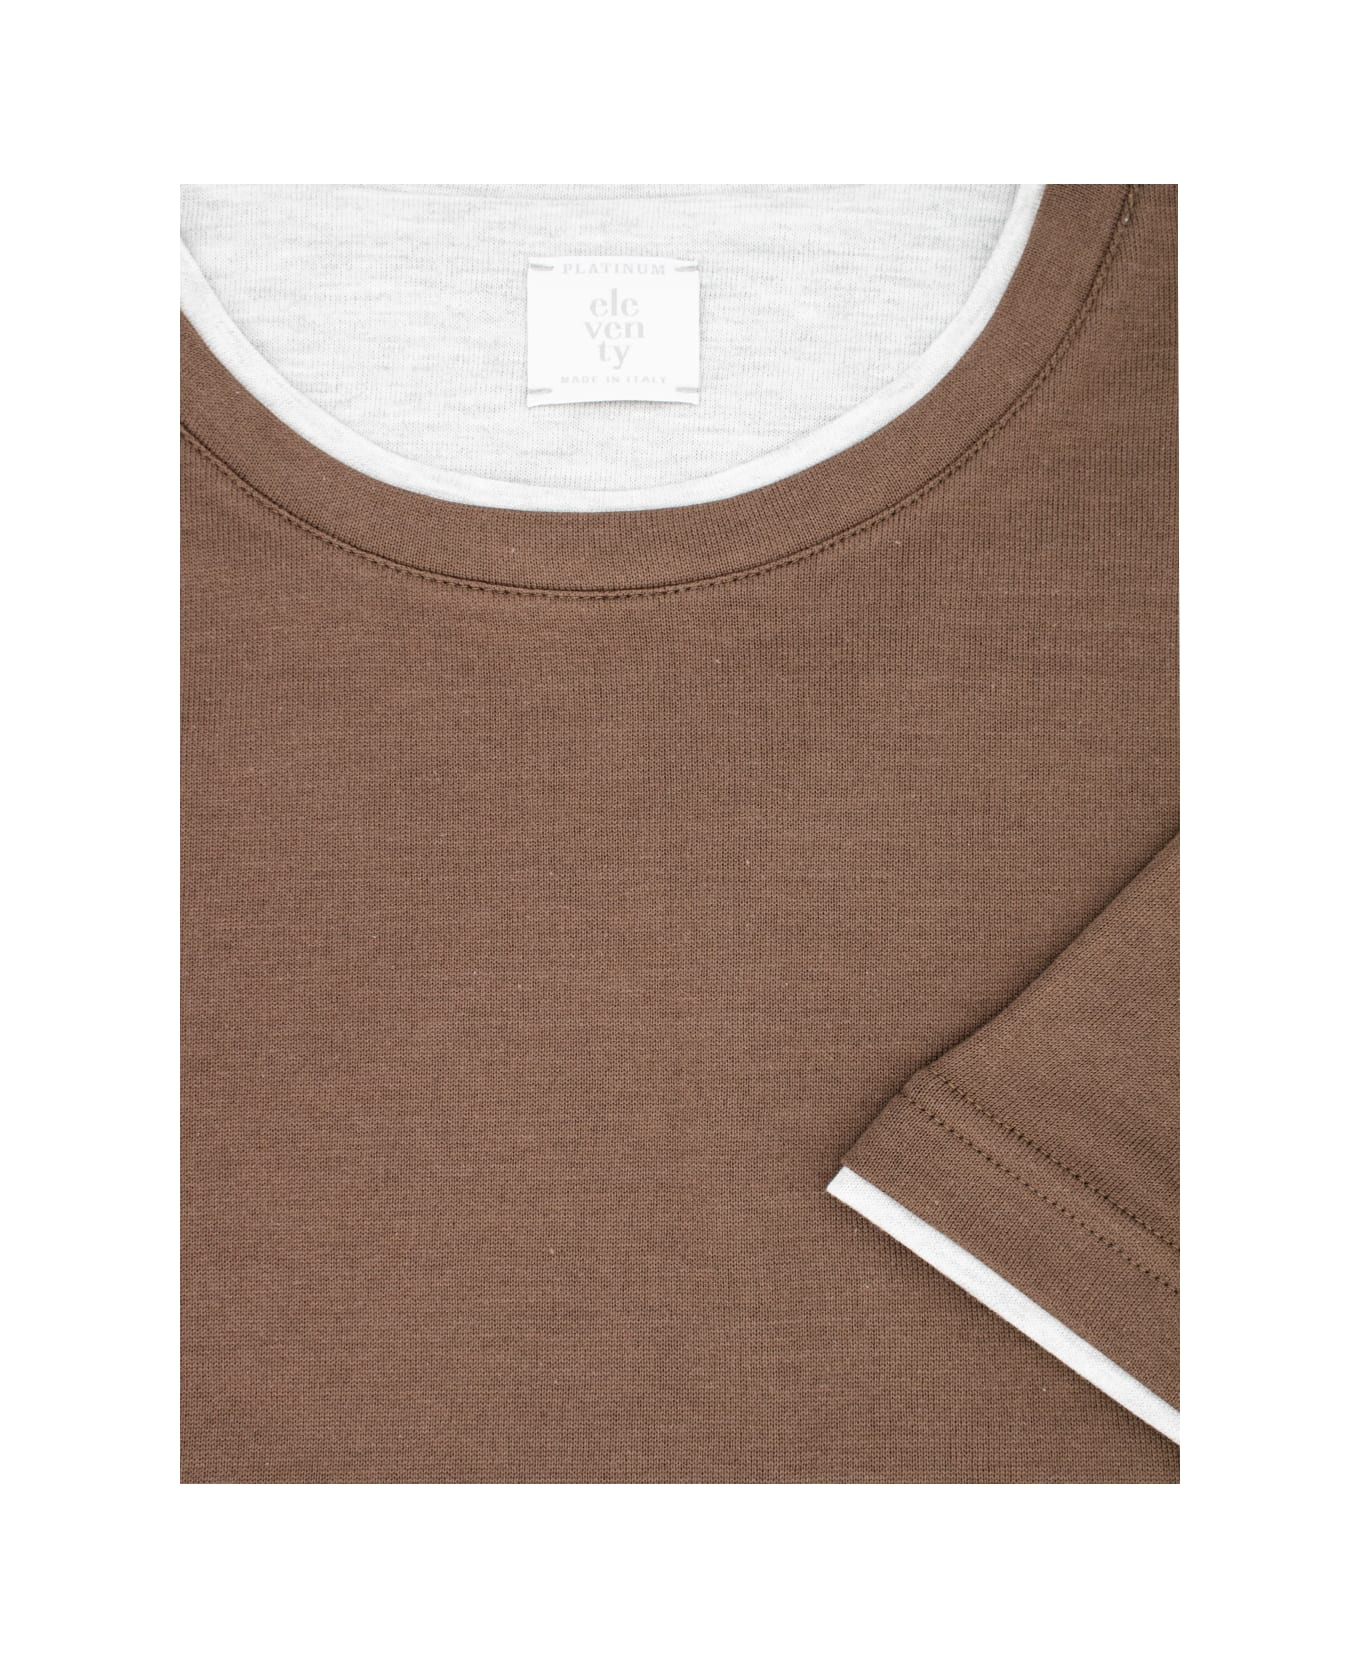 Eleventy T-shirt - BROWN AND LIGHT GRAY